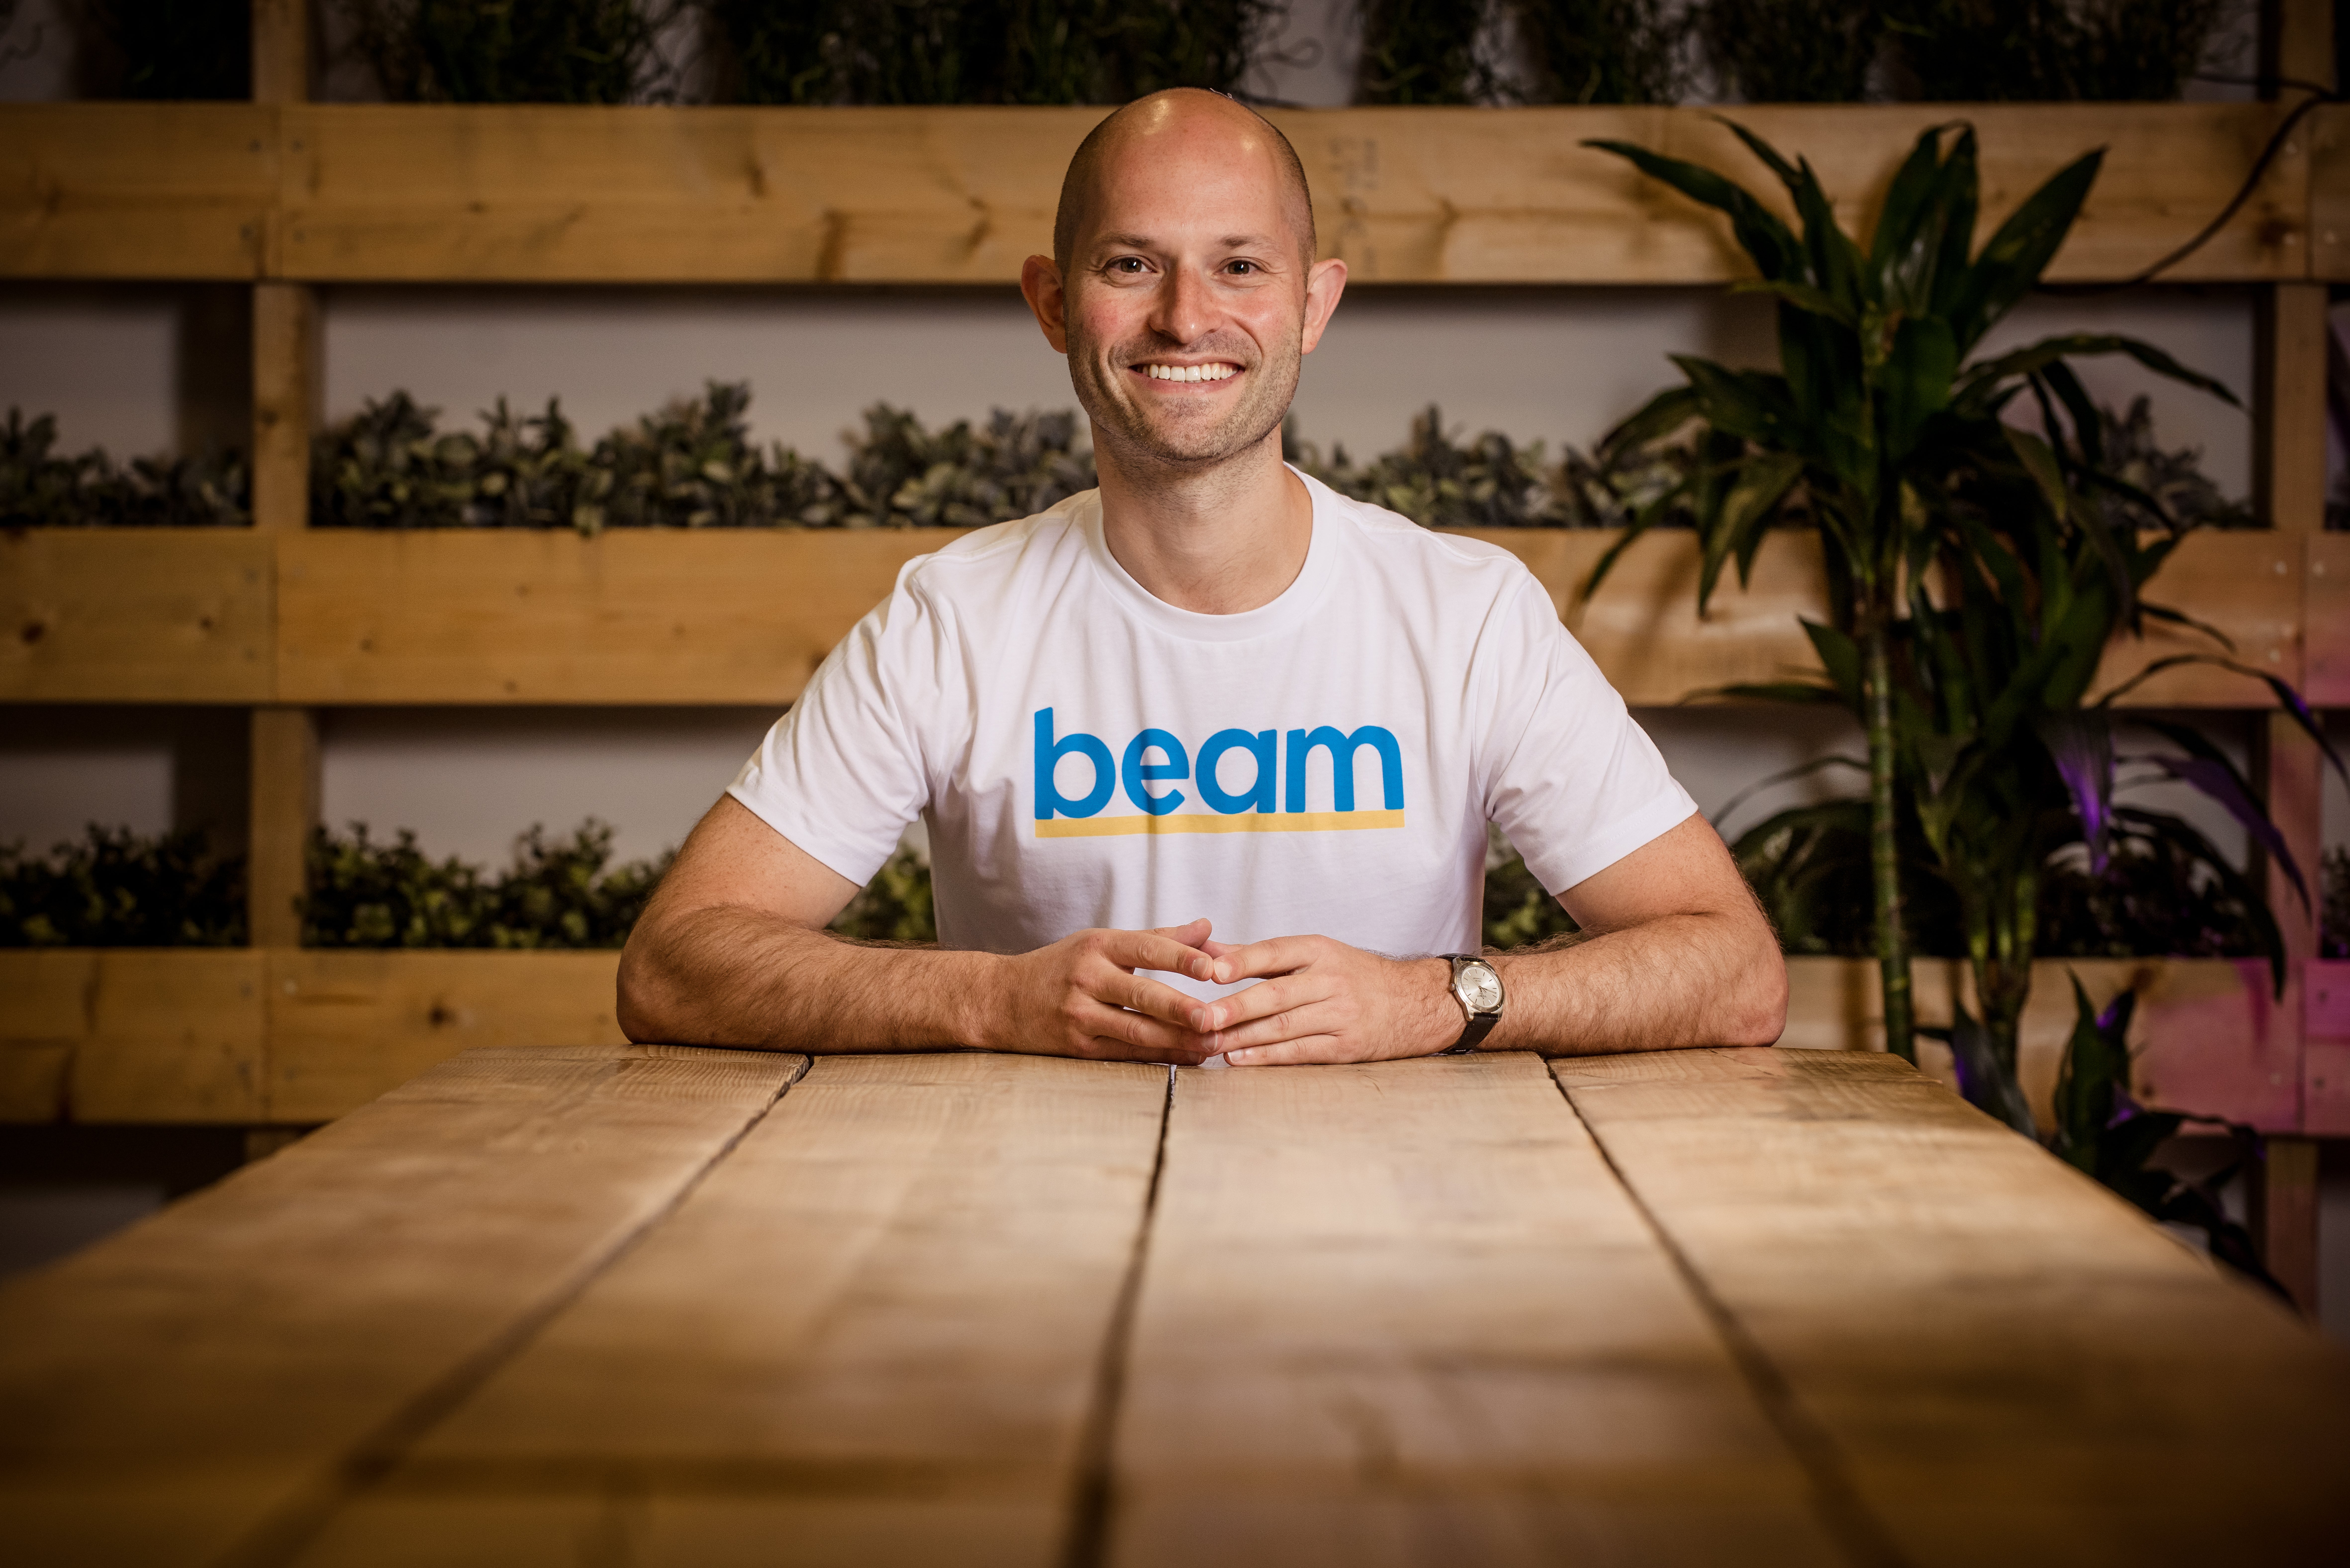 Beam founder Alex Stephany befriended a homeless man and is helping more into work